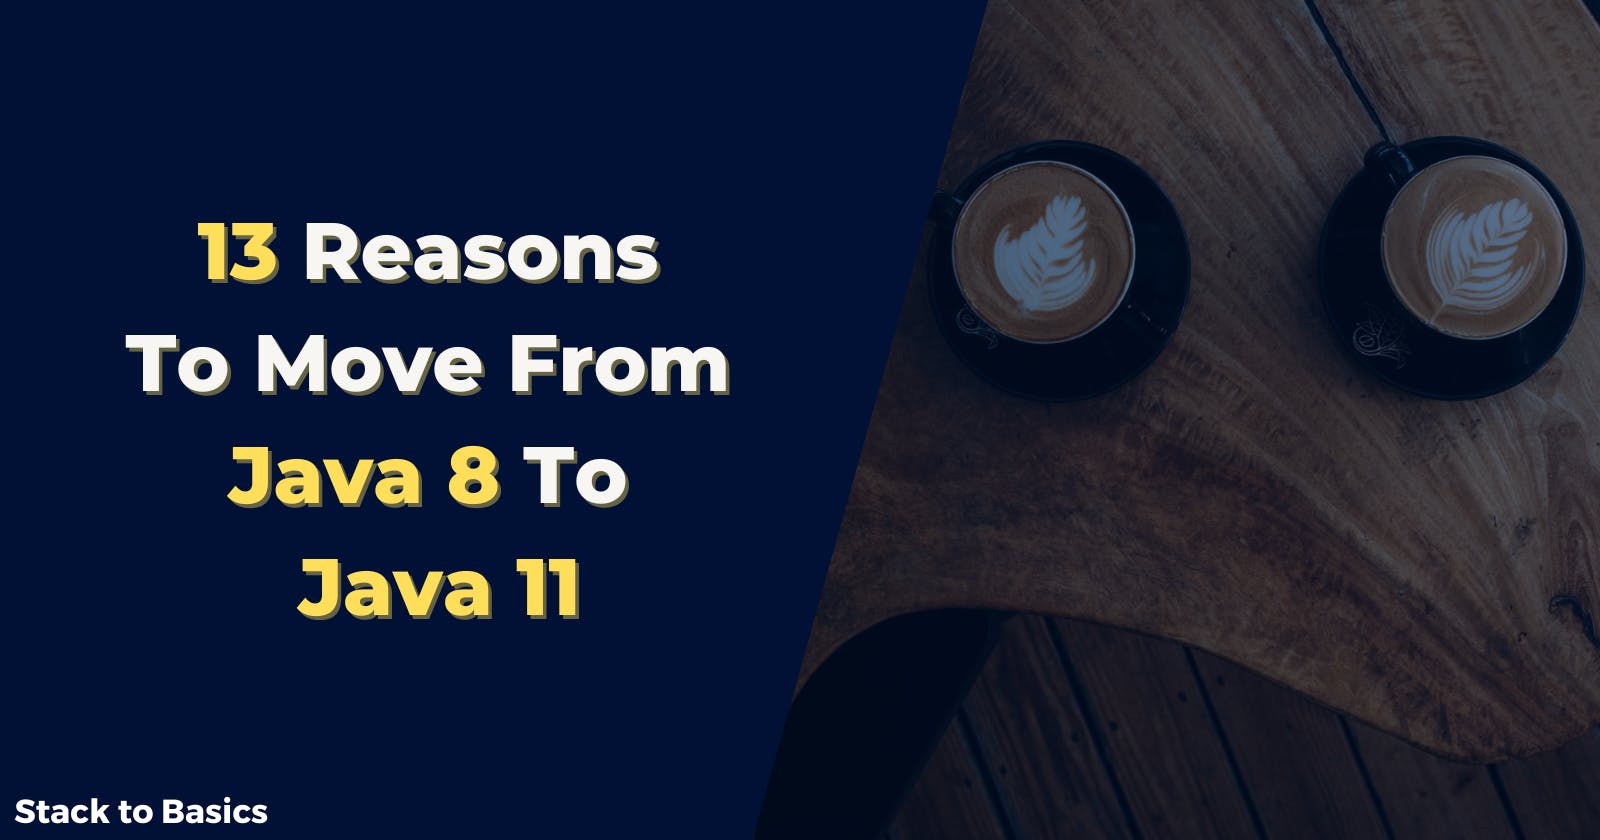 13 Reasons To Move From Java 8 To Java 11